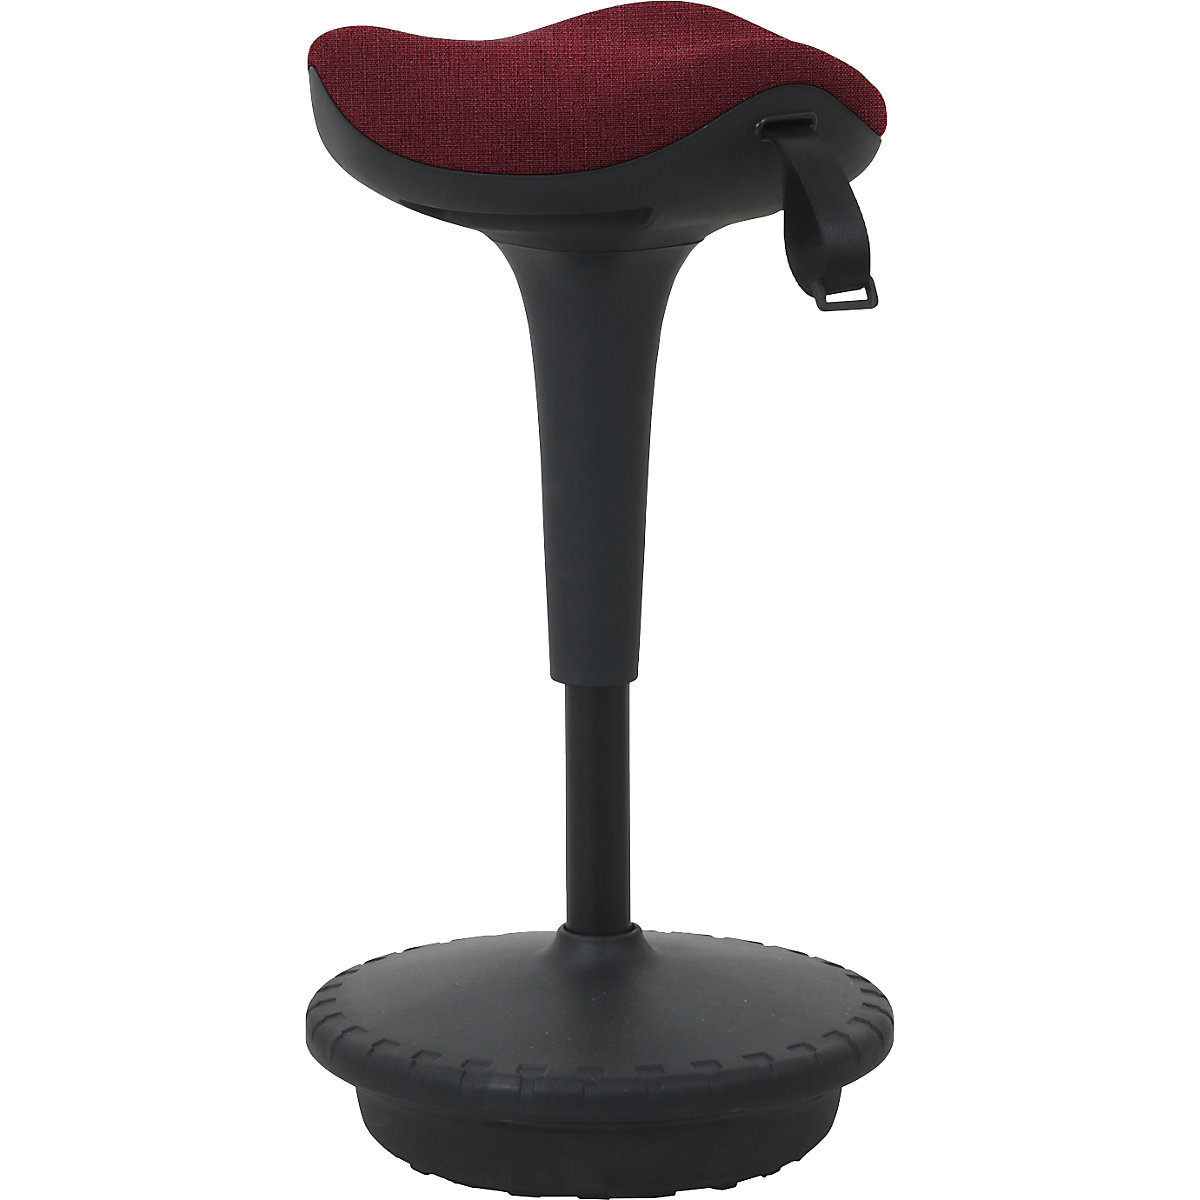 Anti-fatigue stool 6156 – Twinco, triangular seat 325 mm, red cover